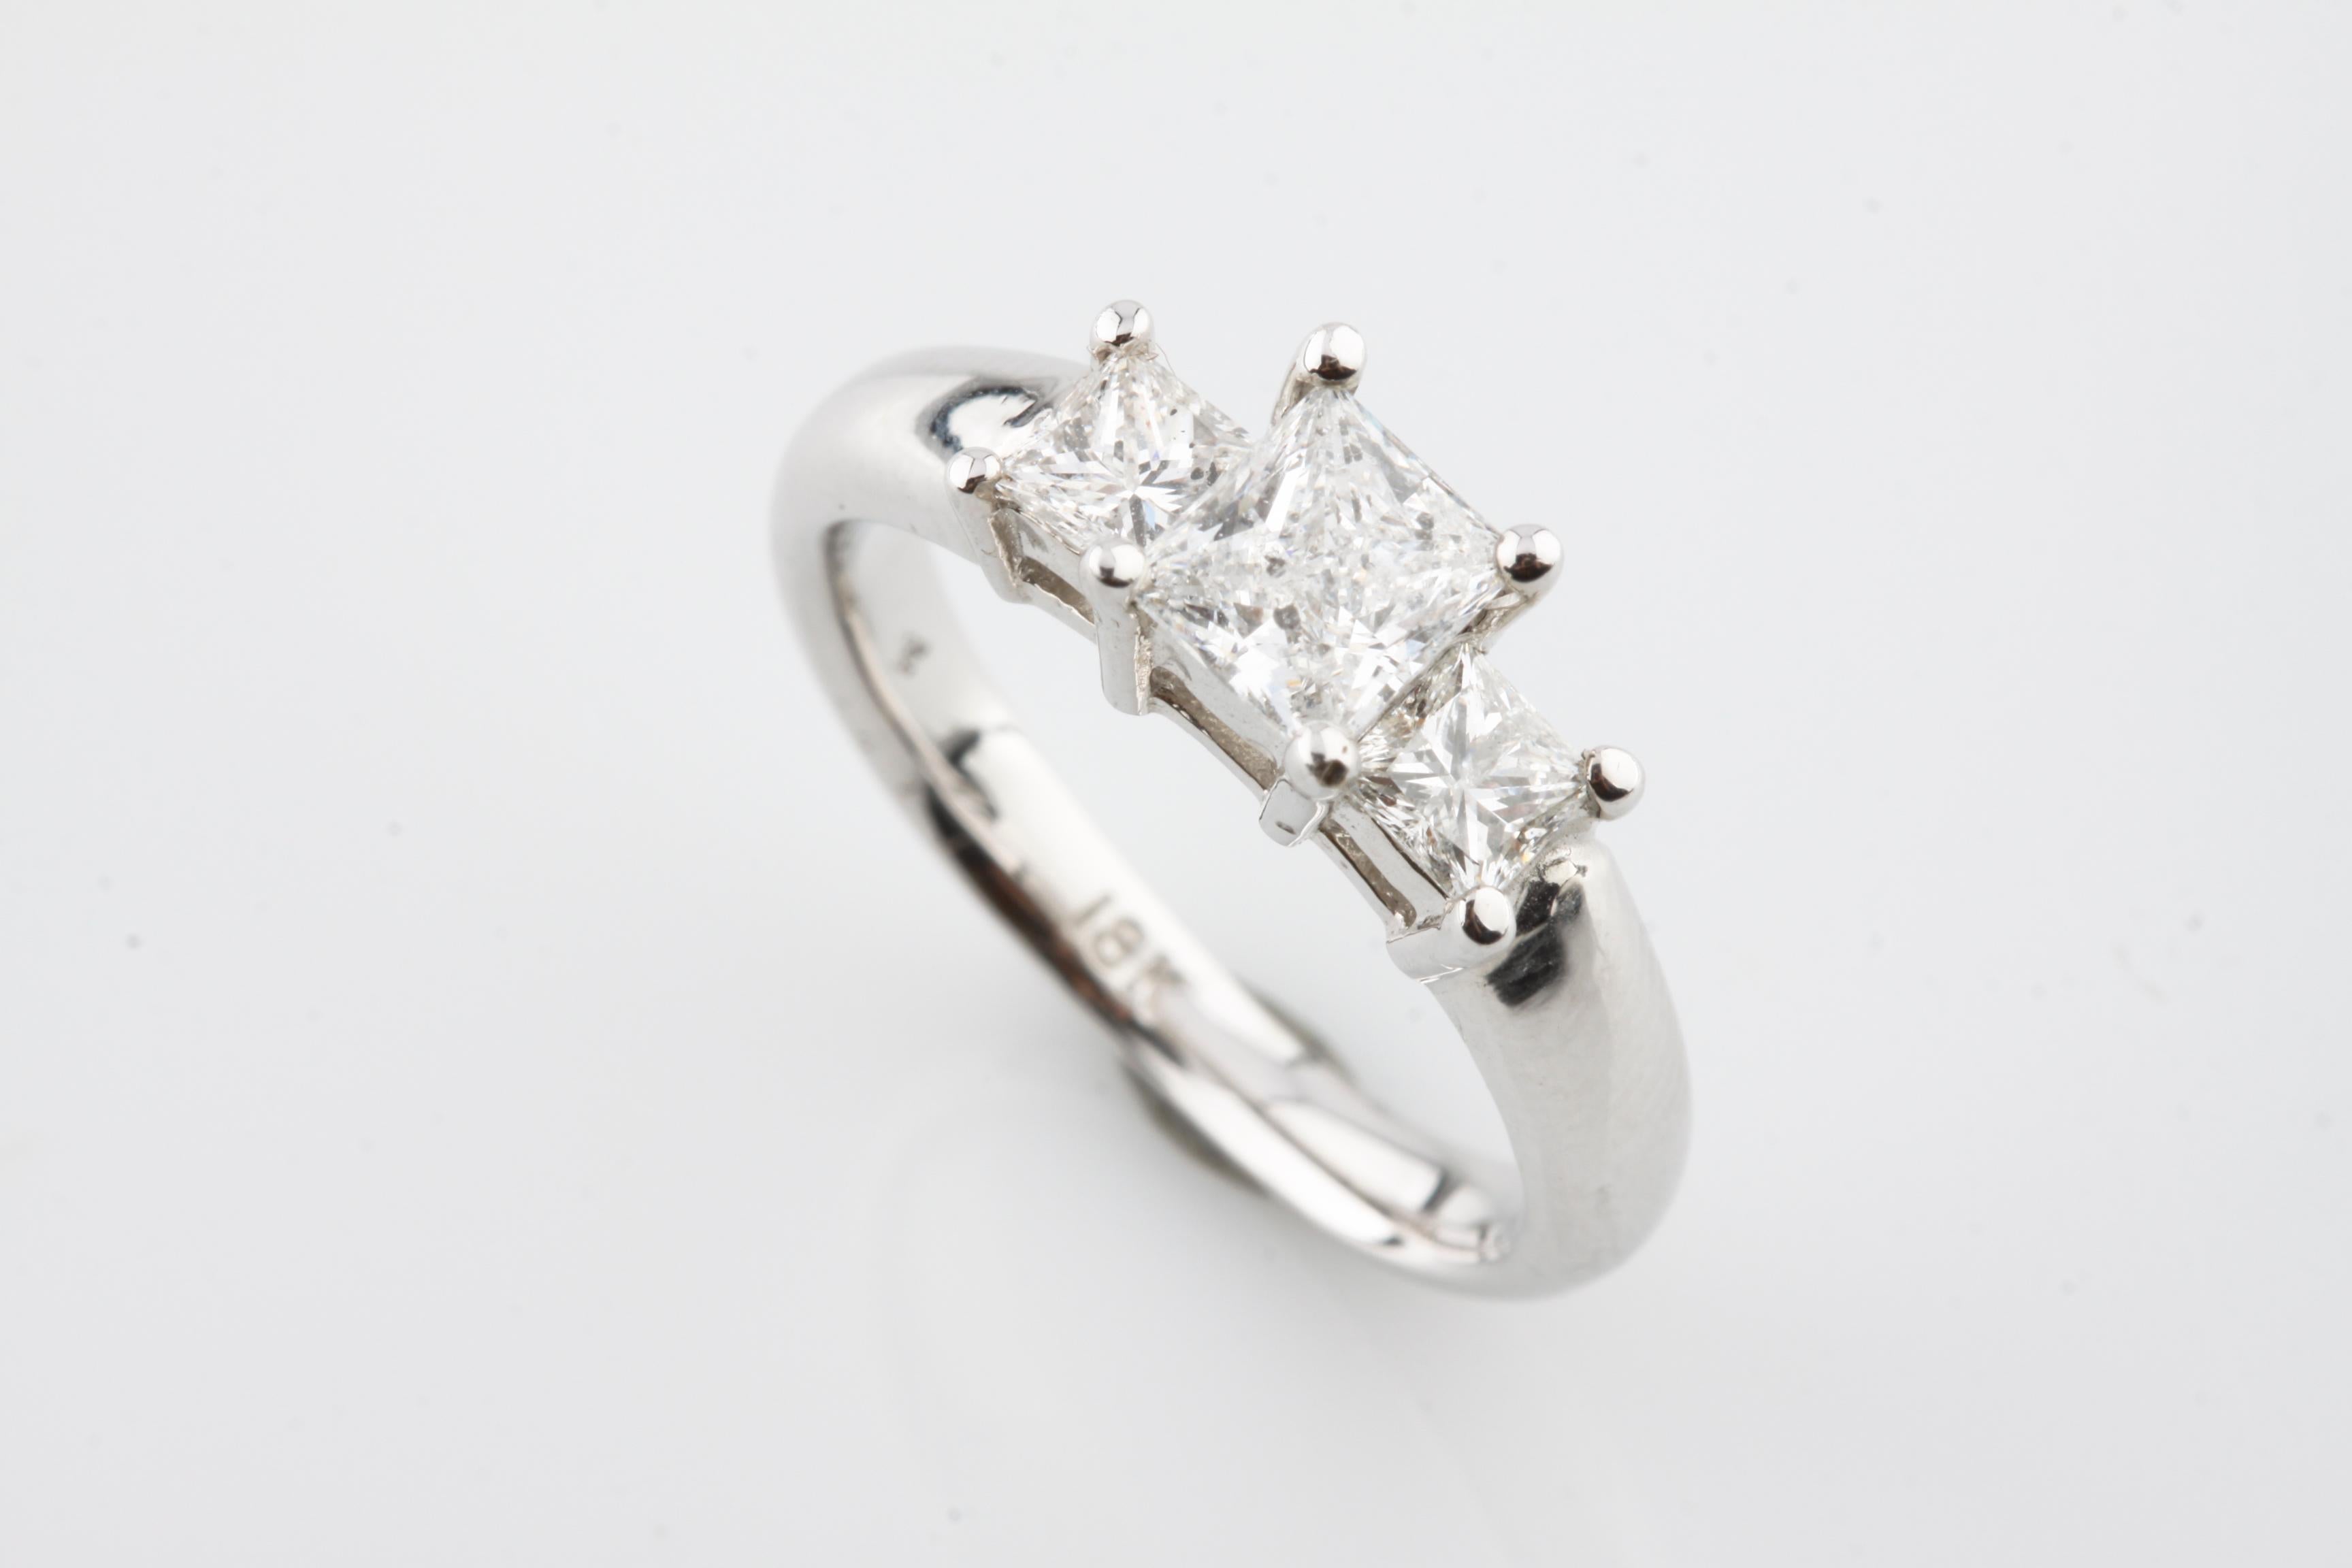 One electronically tested 18KT white gold ladies cast diamond unity ring with bright finish.
Condition is good.
Identified with markings of 